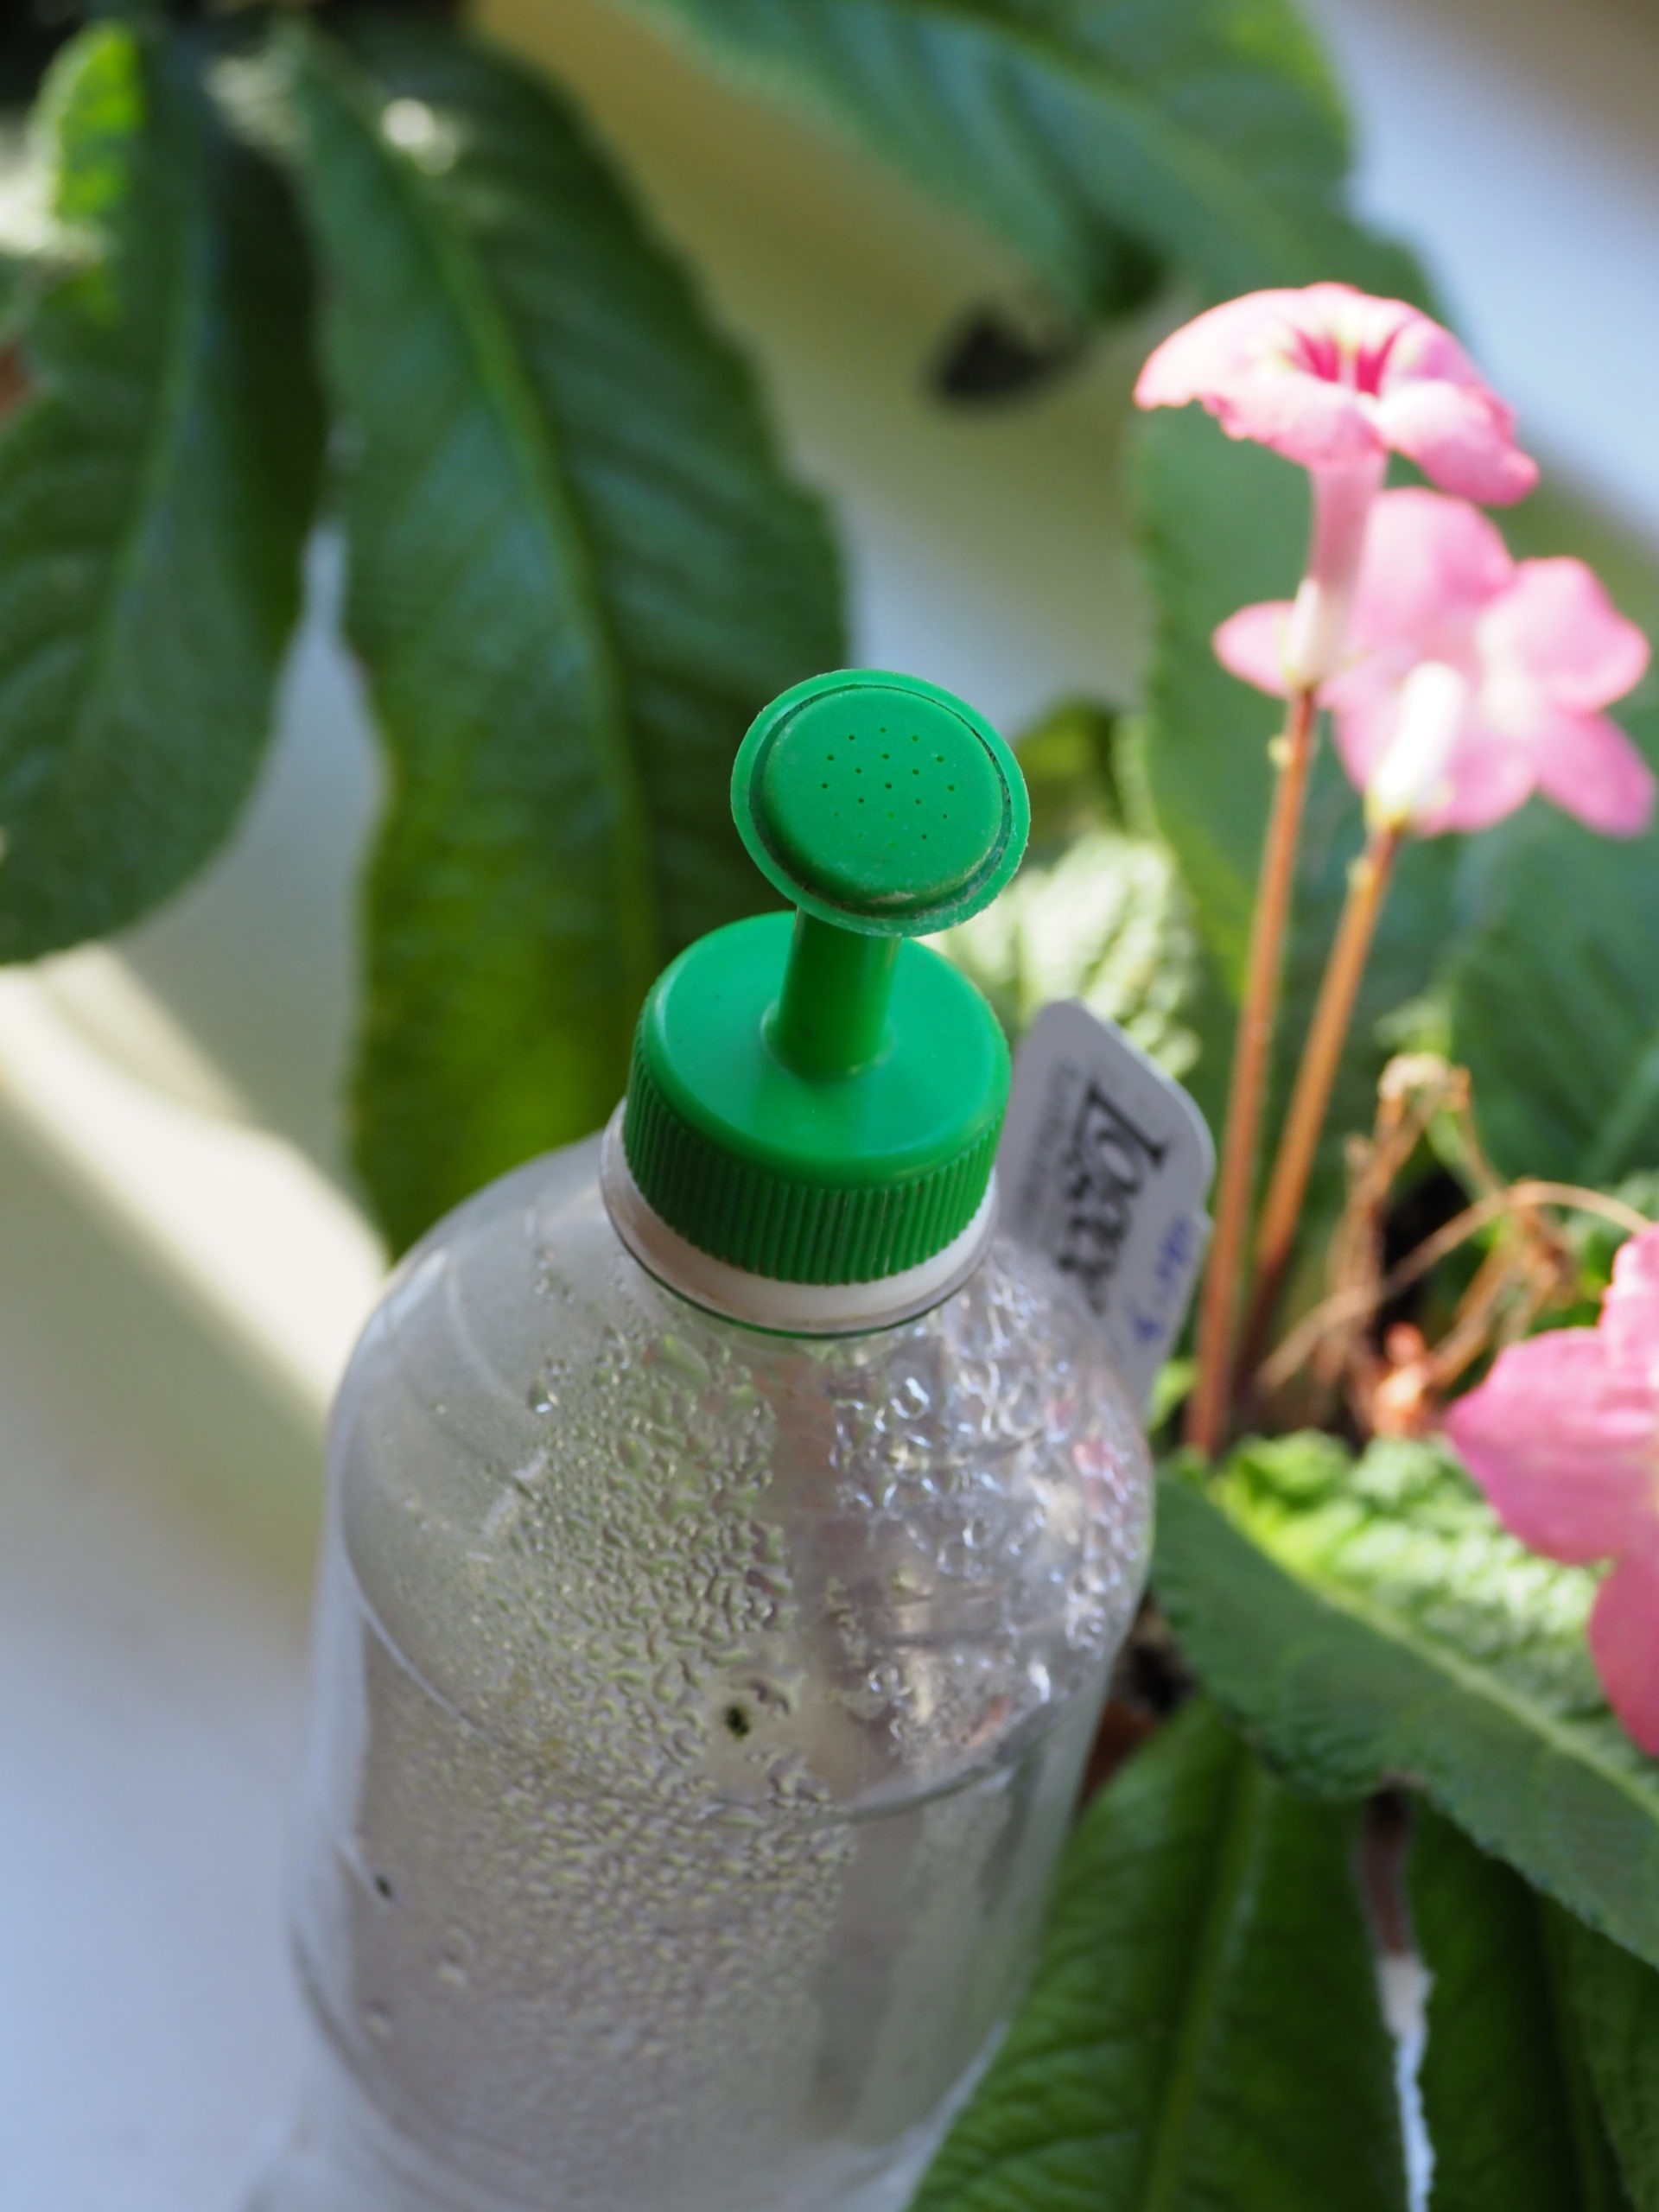 One of the bottle top waterers mentioned in this weeks column. It’s attached to a water bottle and can be used for seed flats, transplanted seedlings and other watering uses. Four tips (two medium and two fine) go for about $6.